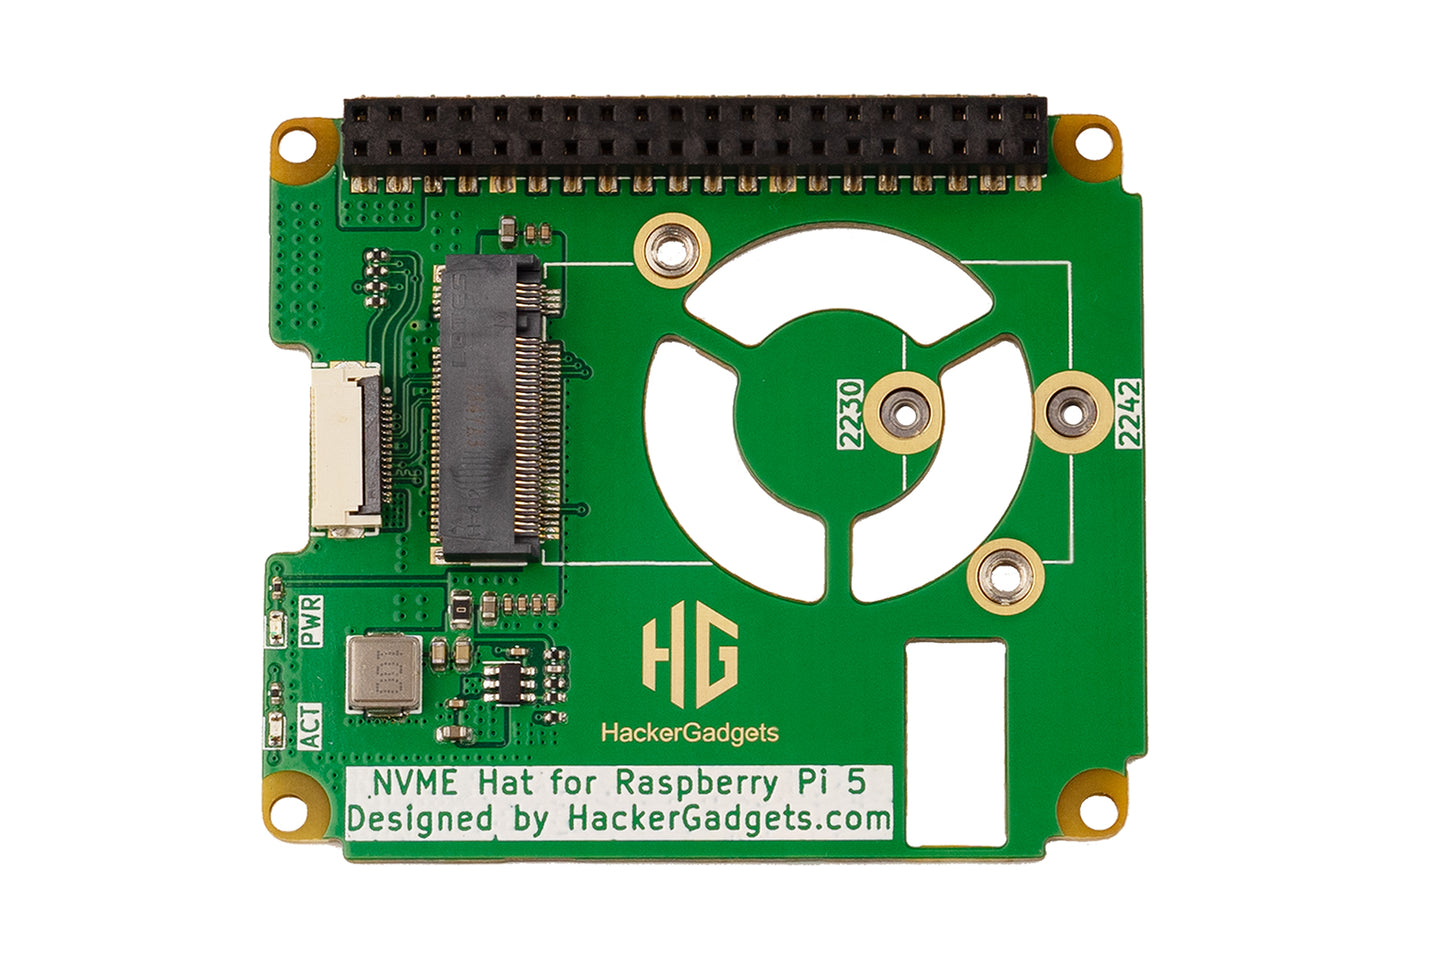 NVME Hat for Raspberry Pi 5 that fit in the official case.